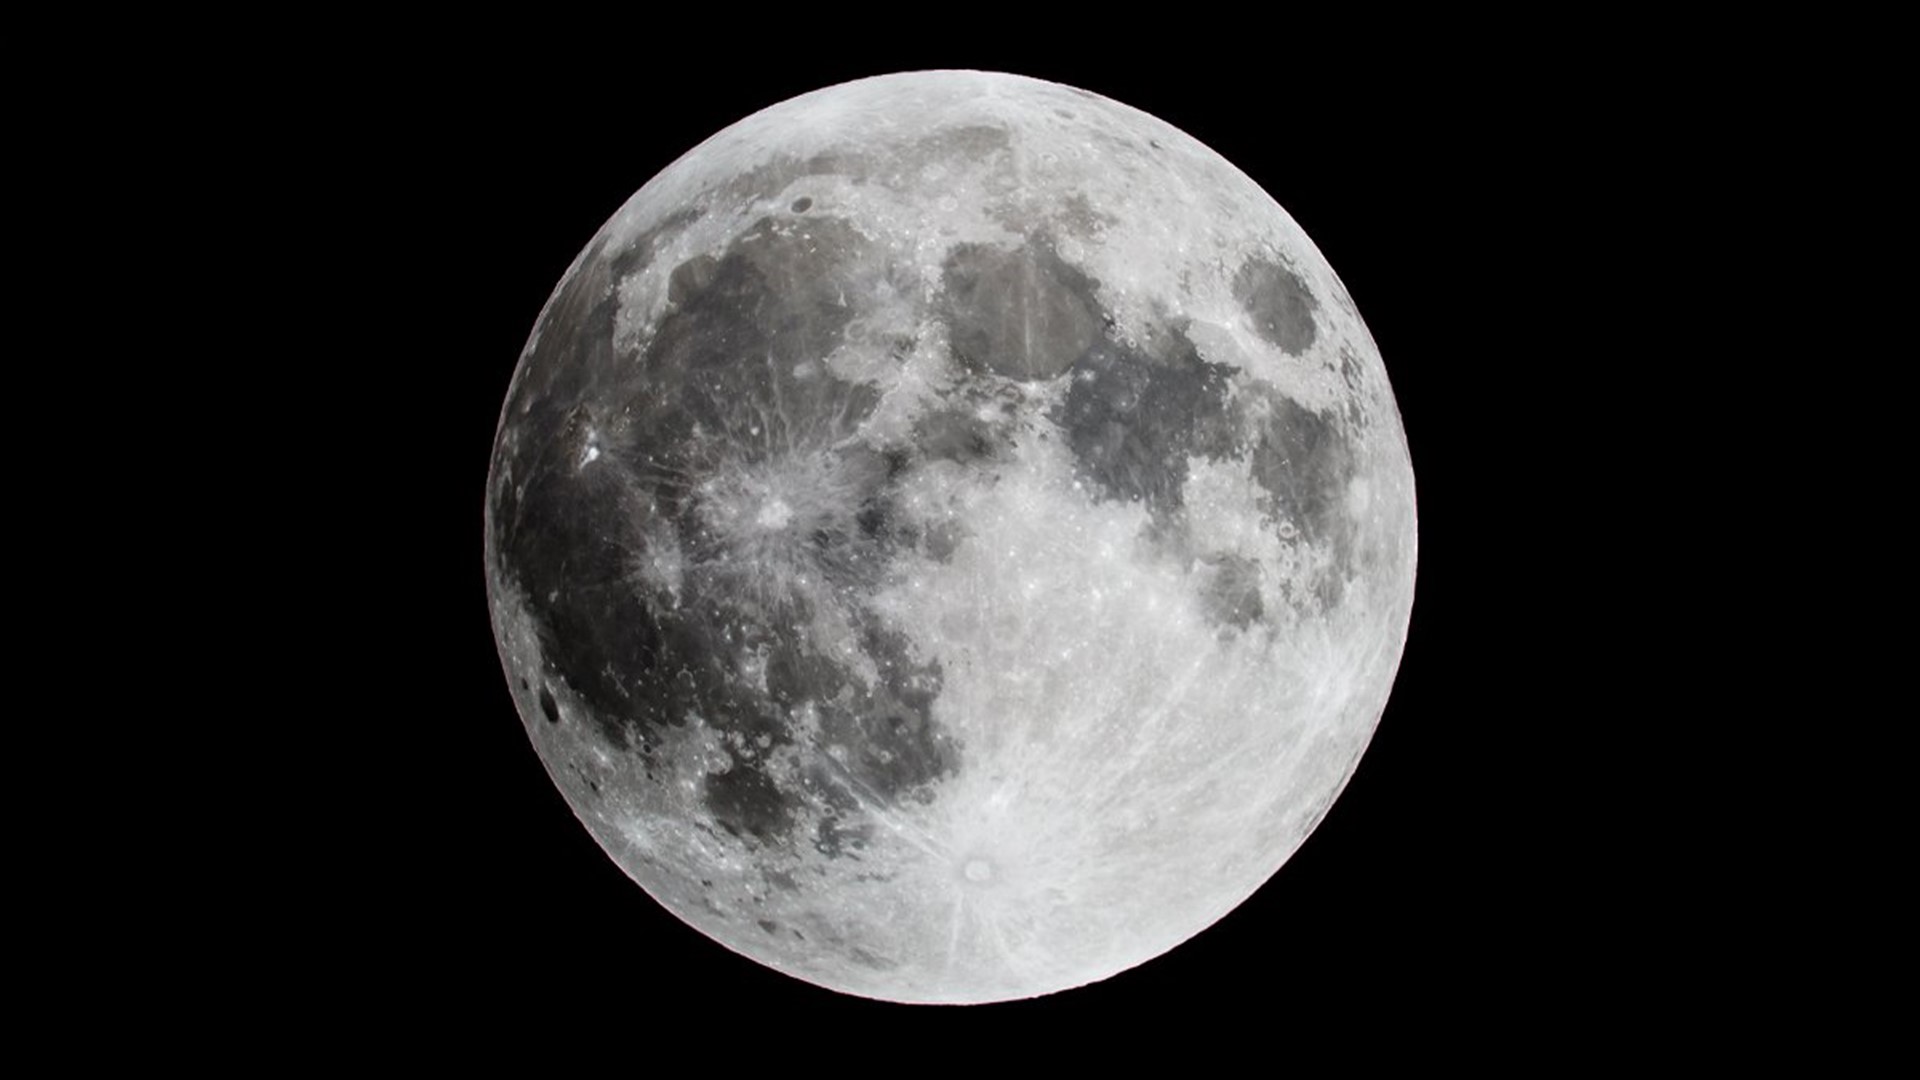 John Hickey explains why the moon may look a little smaller than usual.